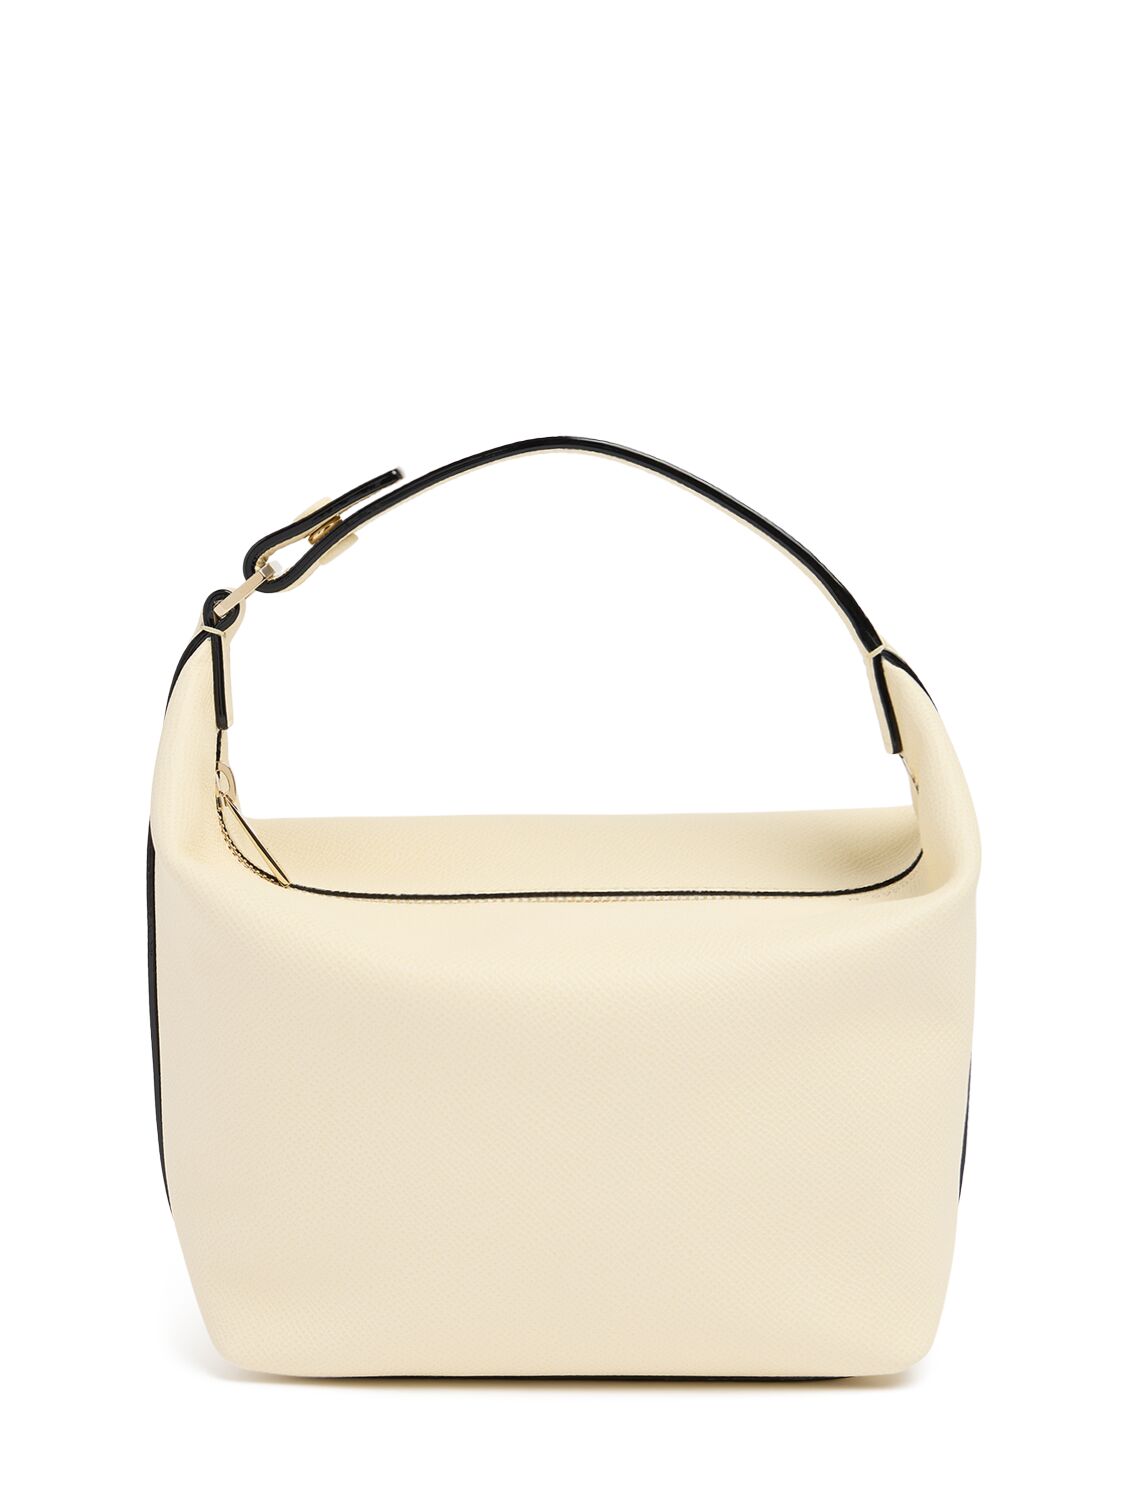 Valextra Mochi Leather Top Handle Bag In Neutral